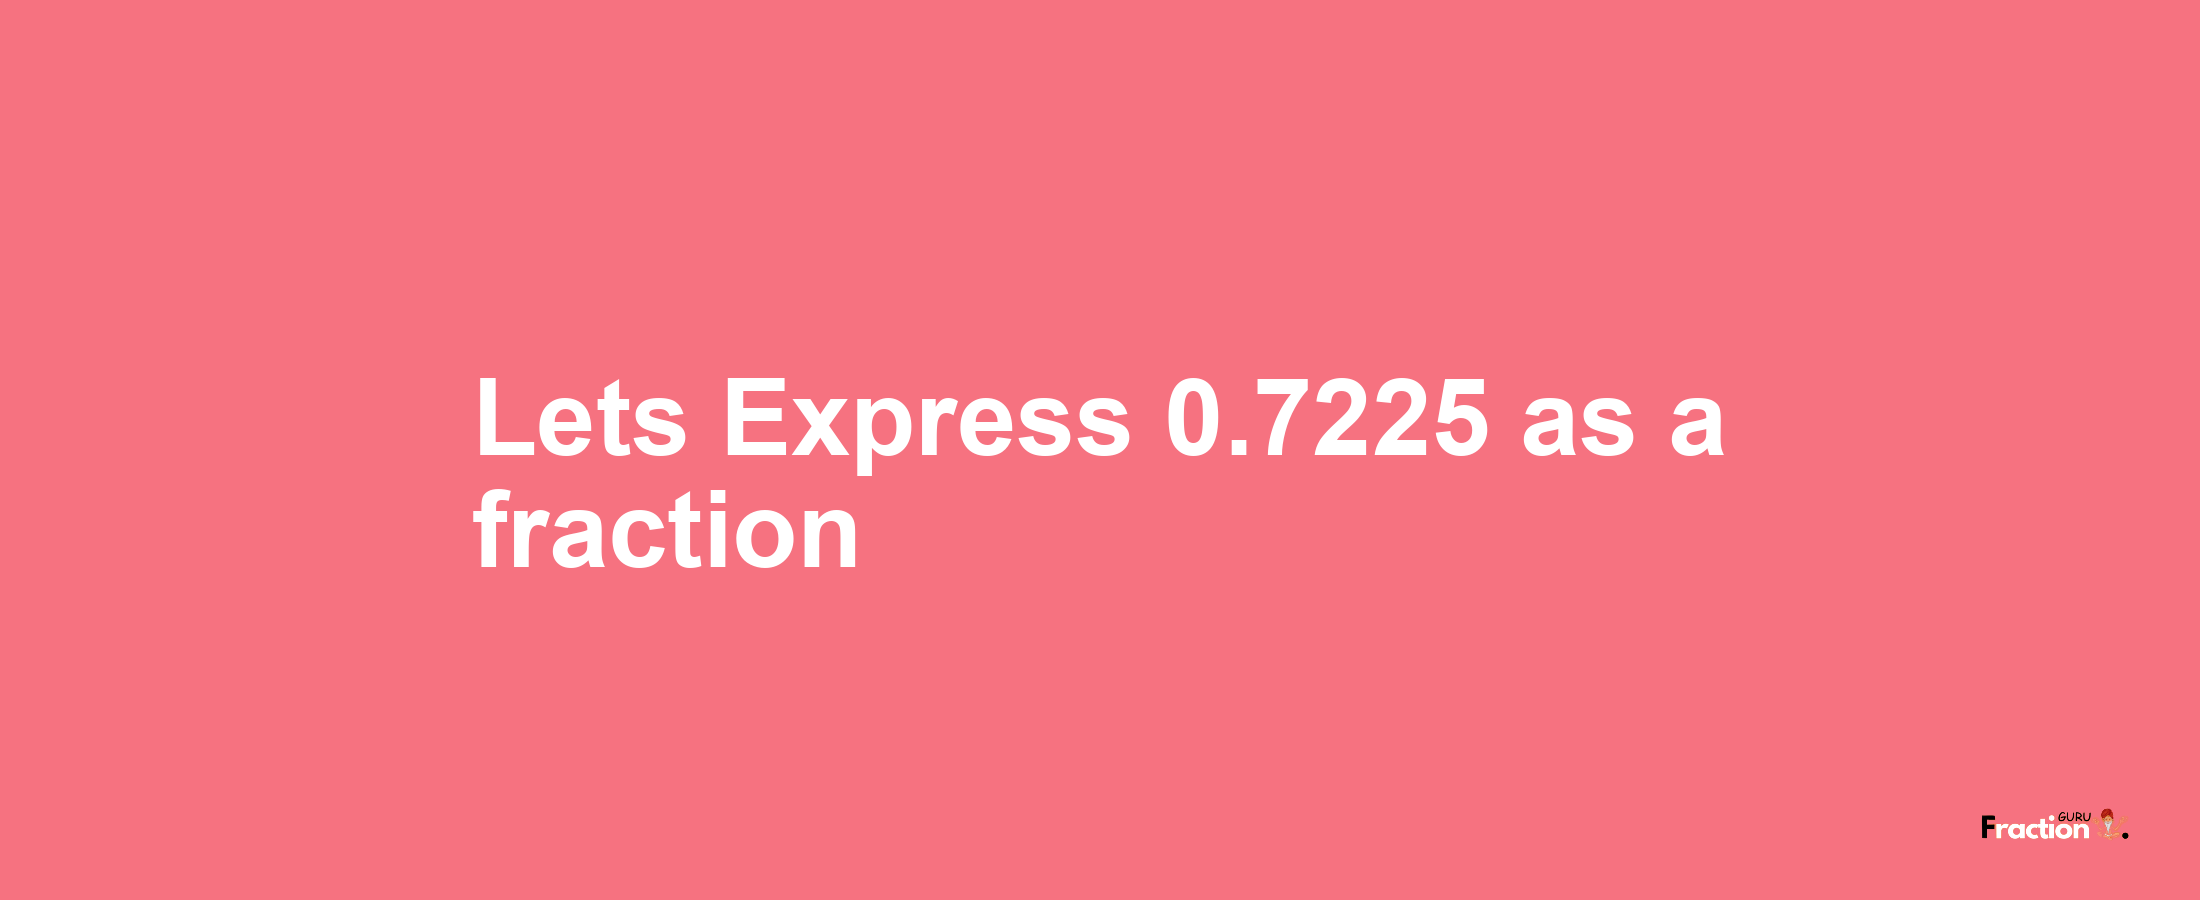 Lets Express 0.7225 as afraction